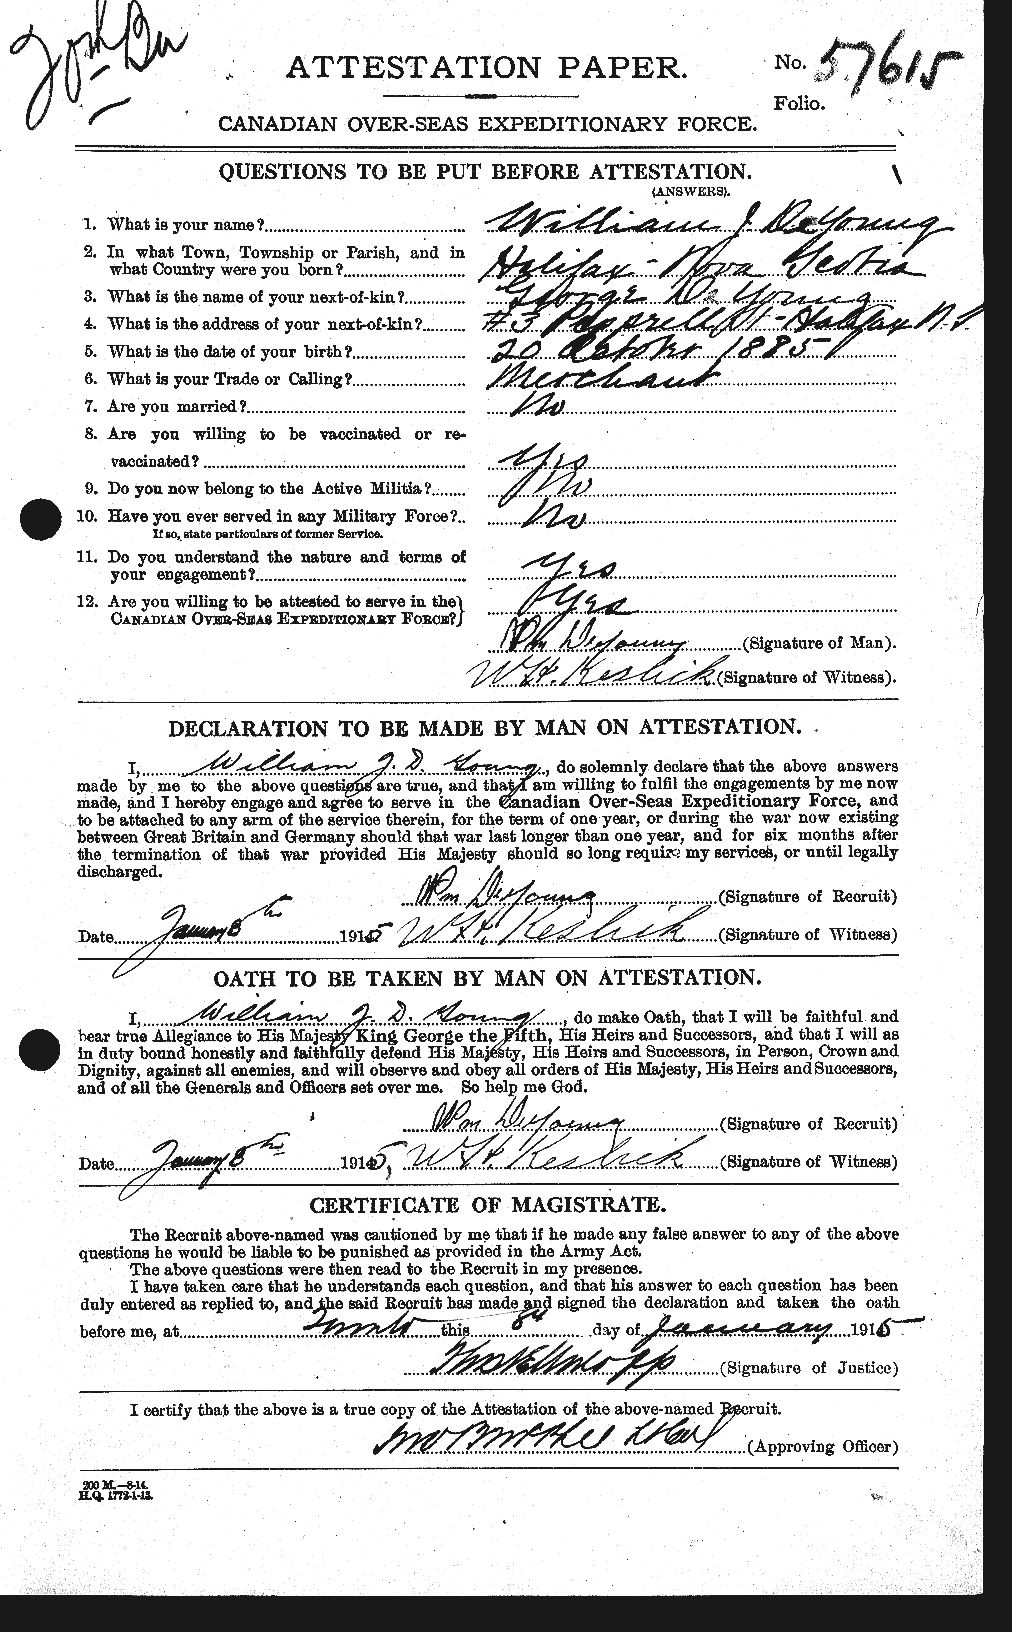 Personnel Records of the First World War - CEF 293258a